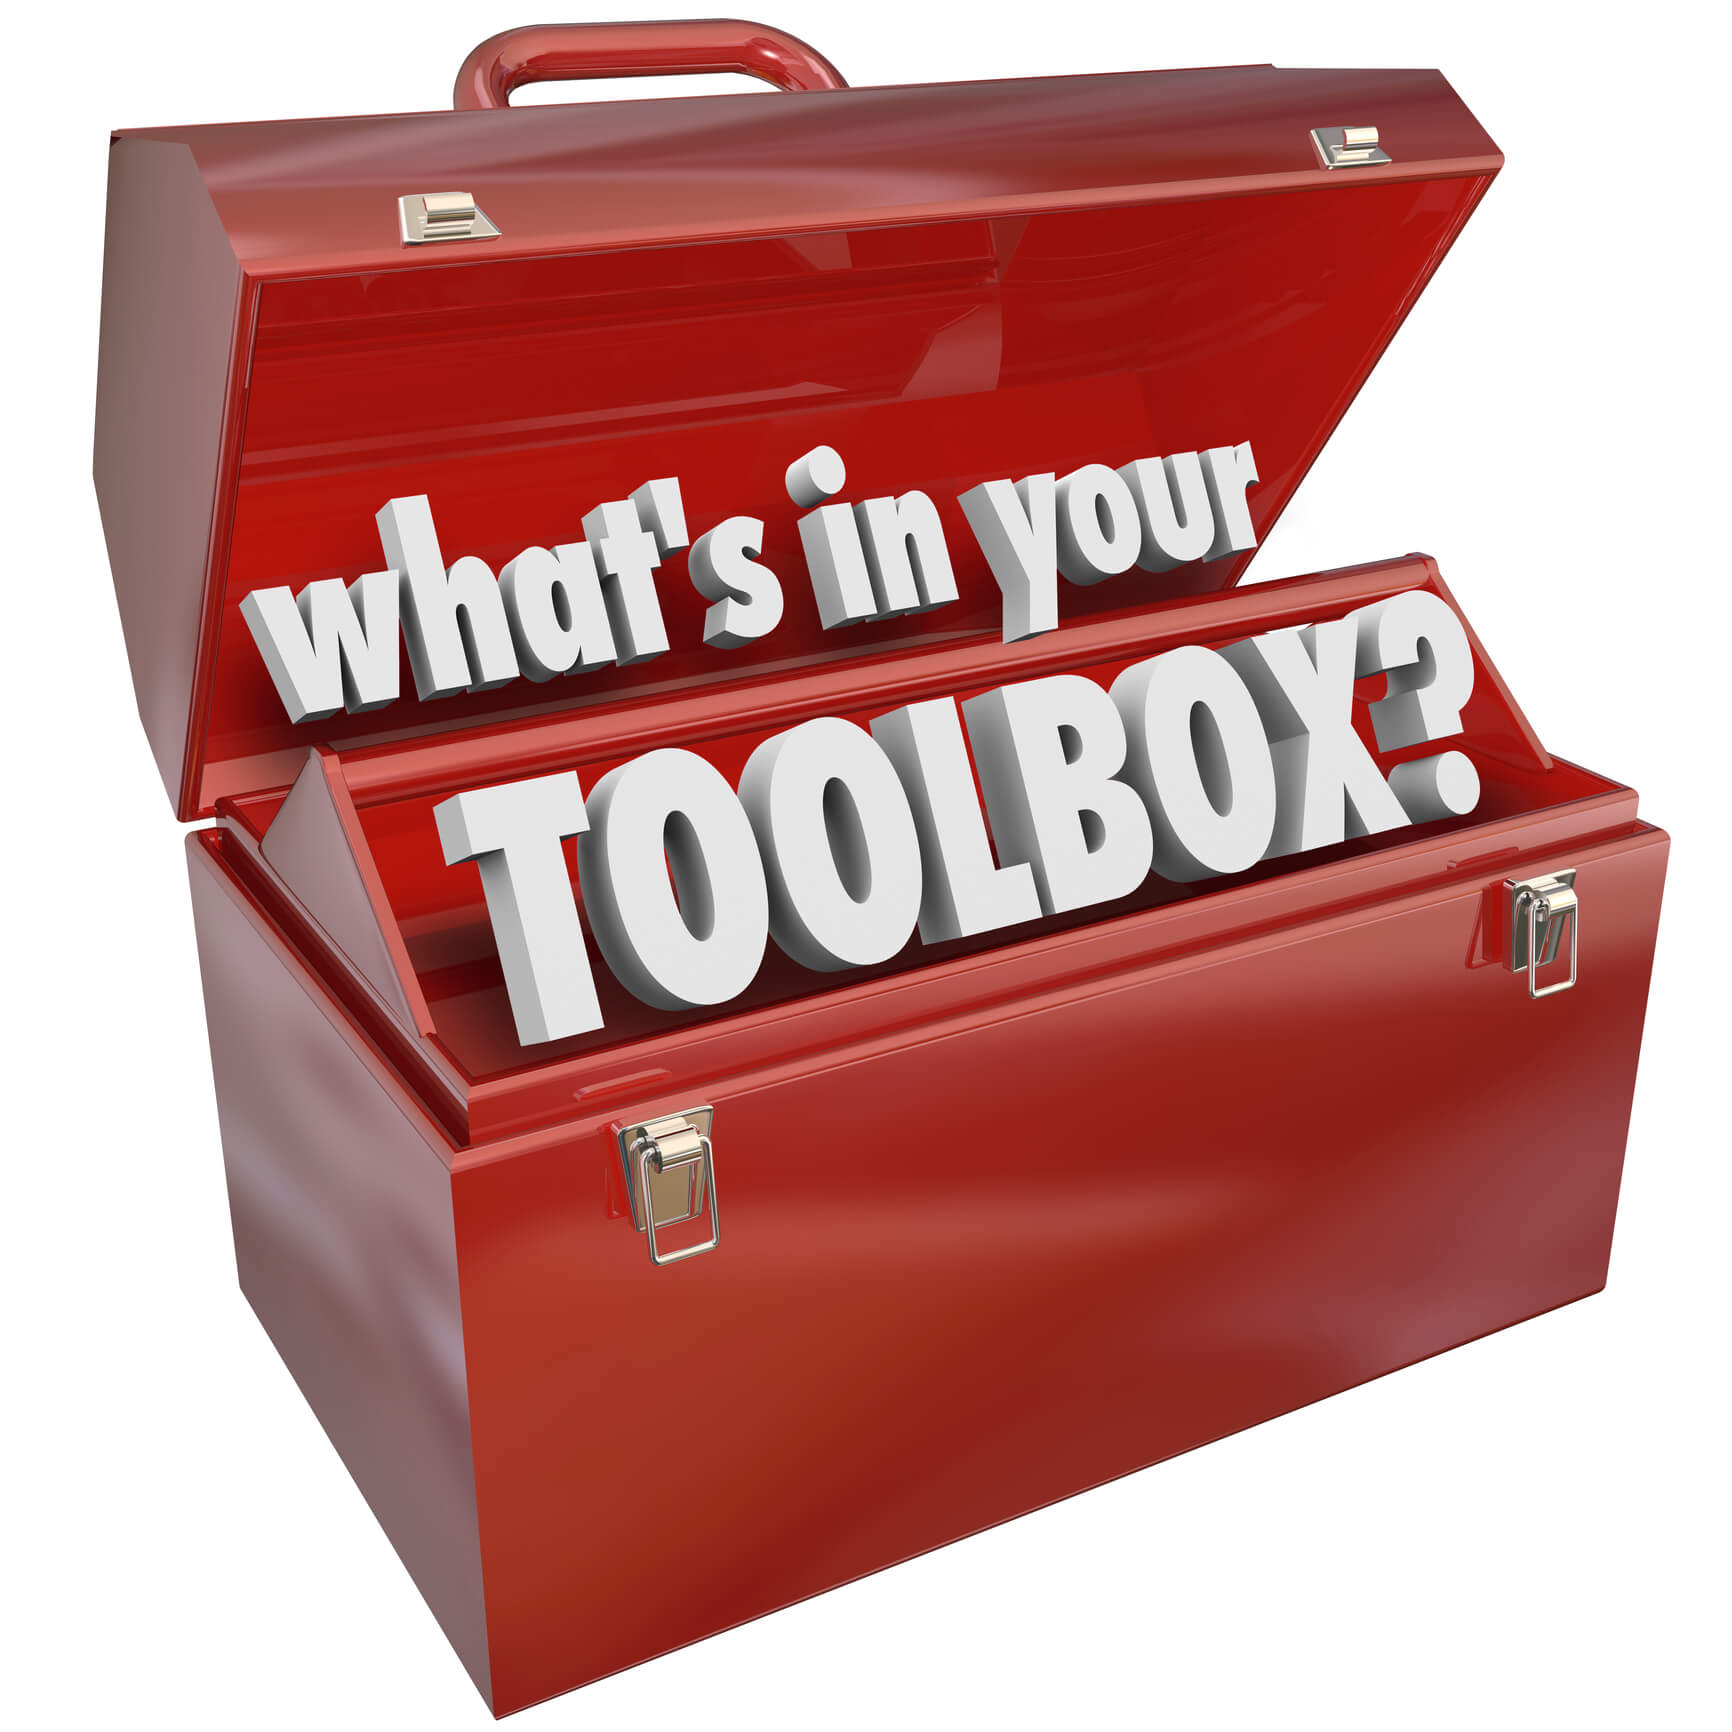 Using the Right ‘Tool Box’